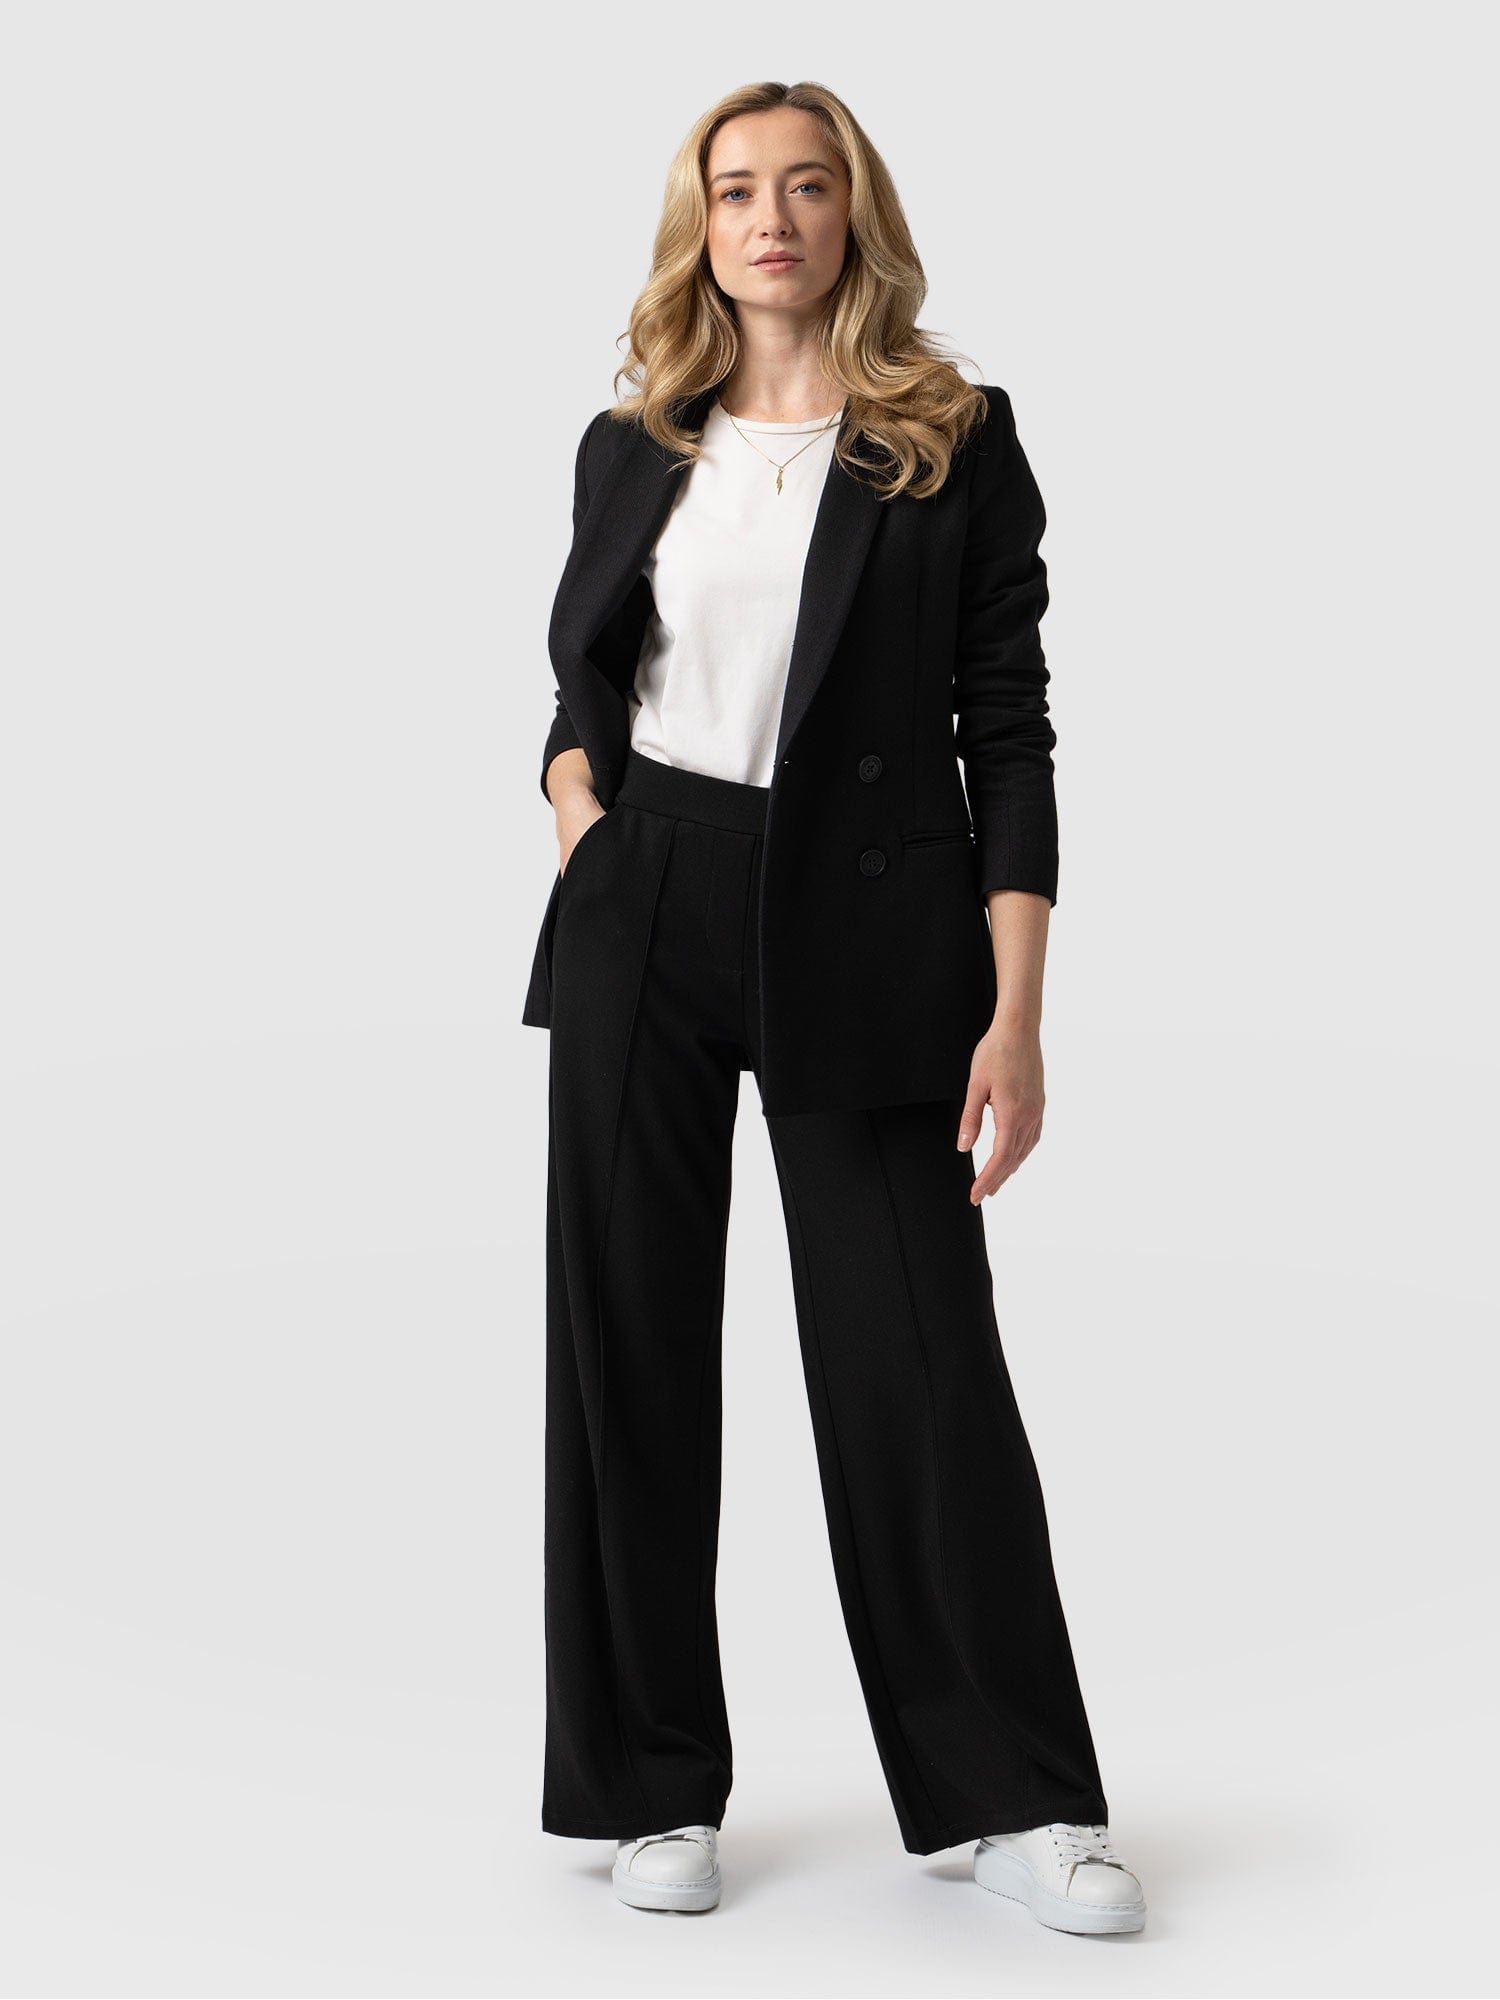 Relaxed Fit Blazer & Wide Leg Trouser Suit | boohoo